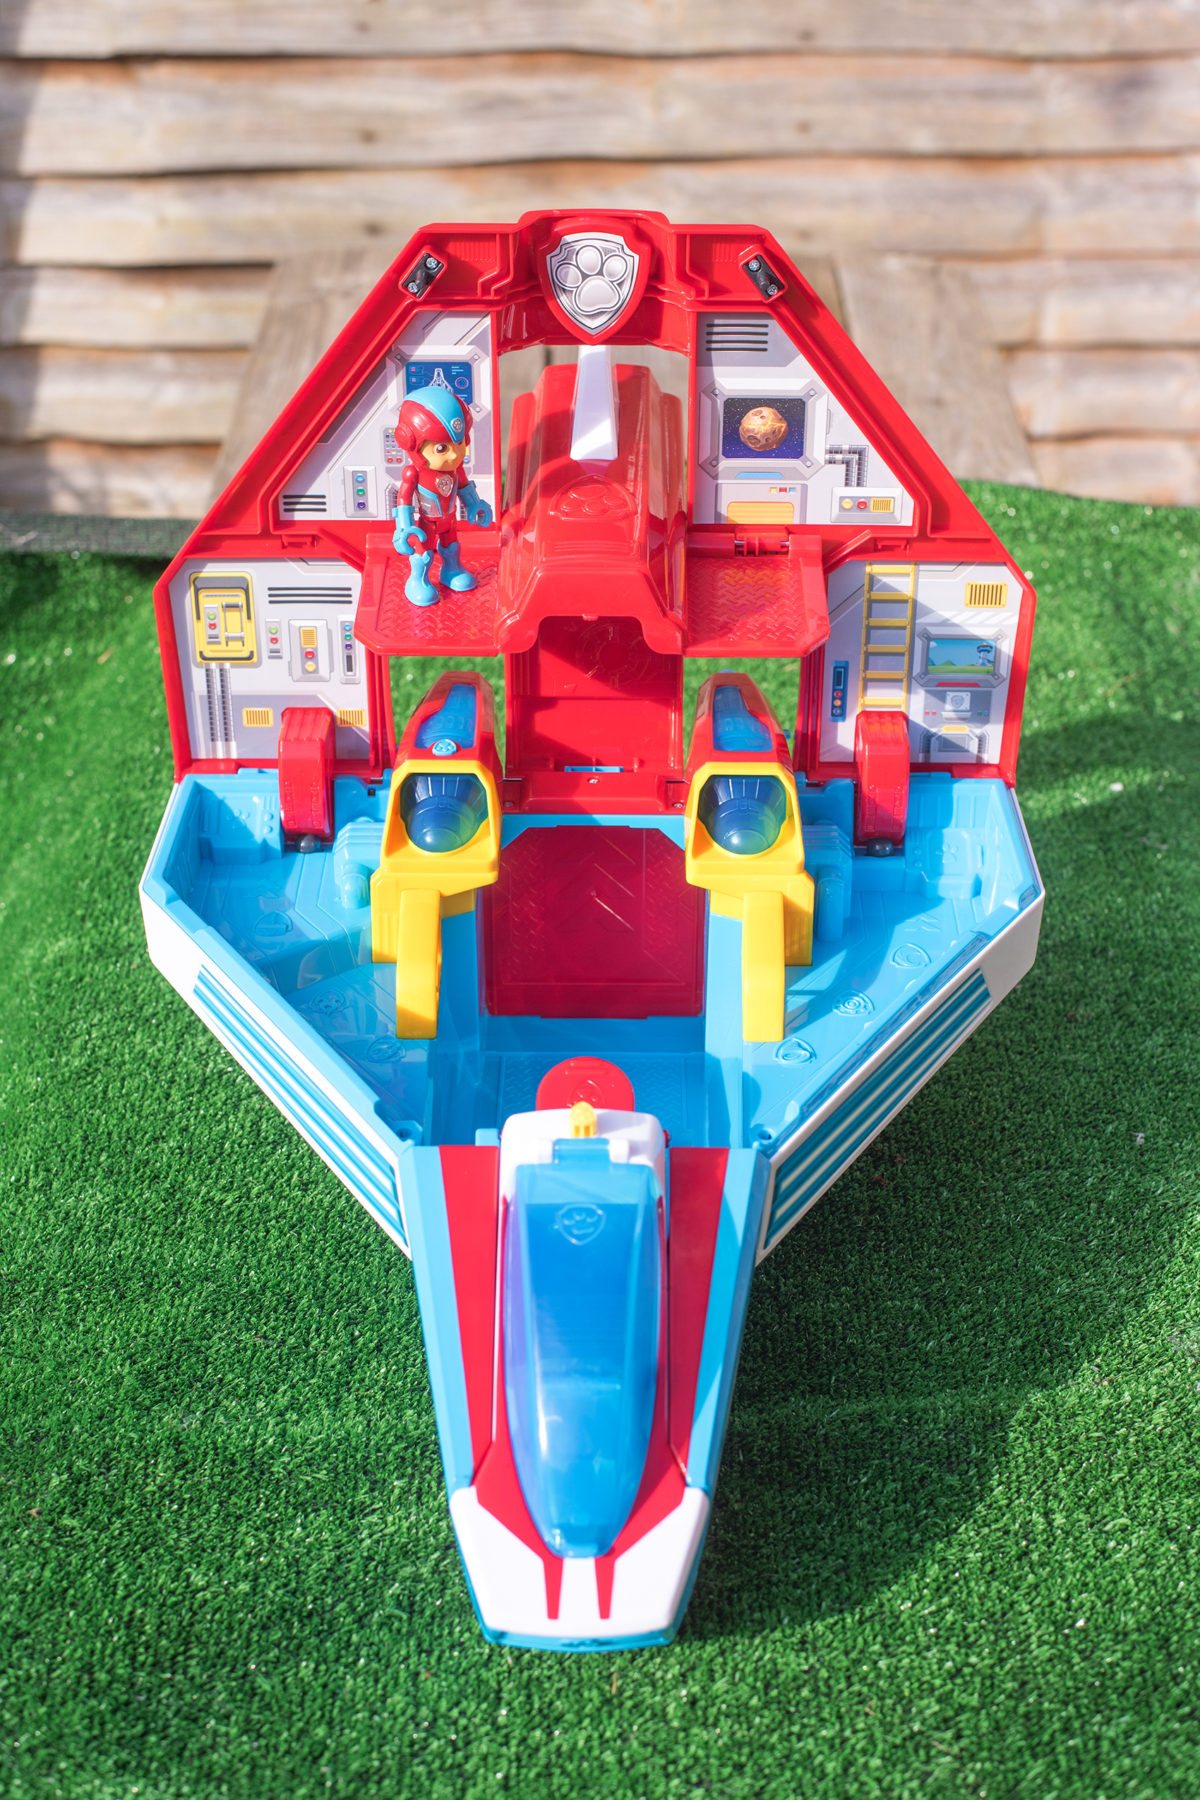 OPEN AND READY FOR PLAY - THE PAW PATROL MIGHTY JET COMMAND CENTRE